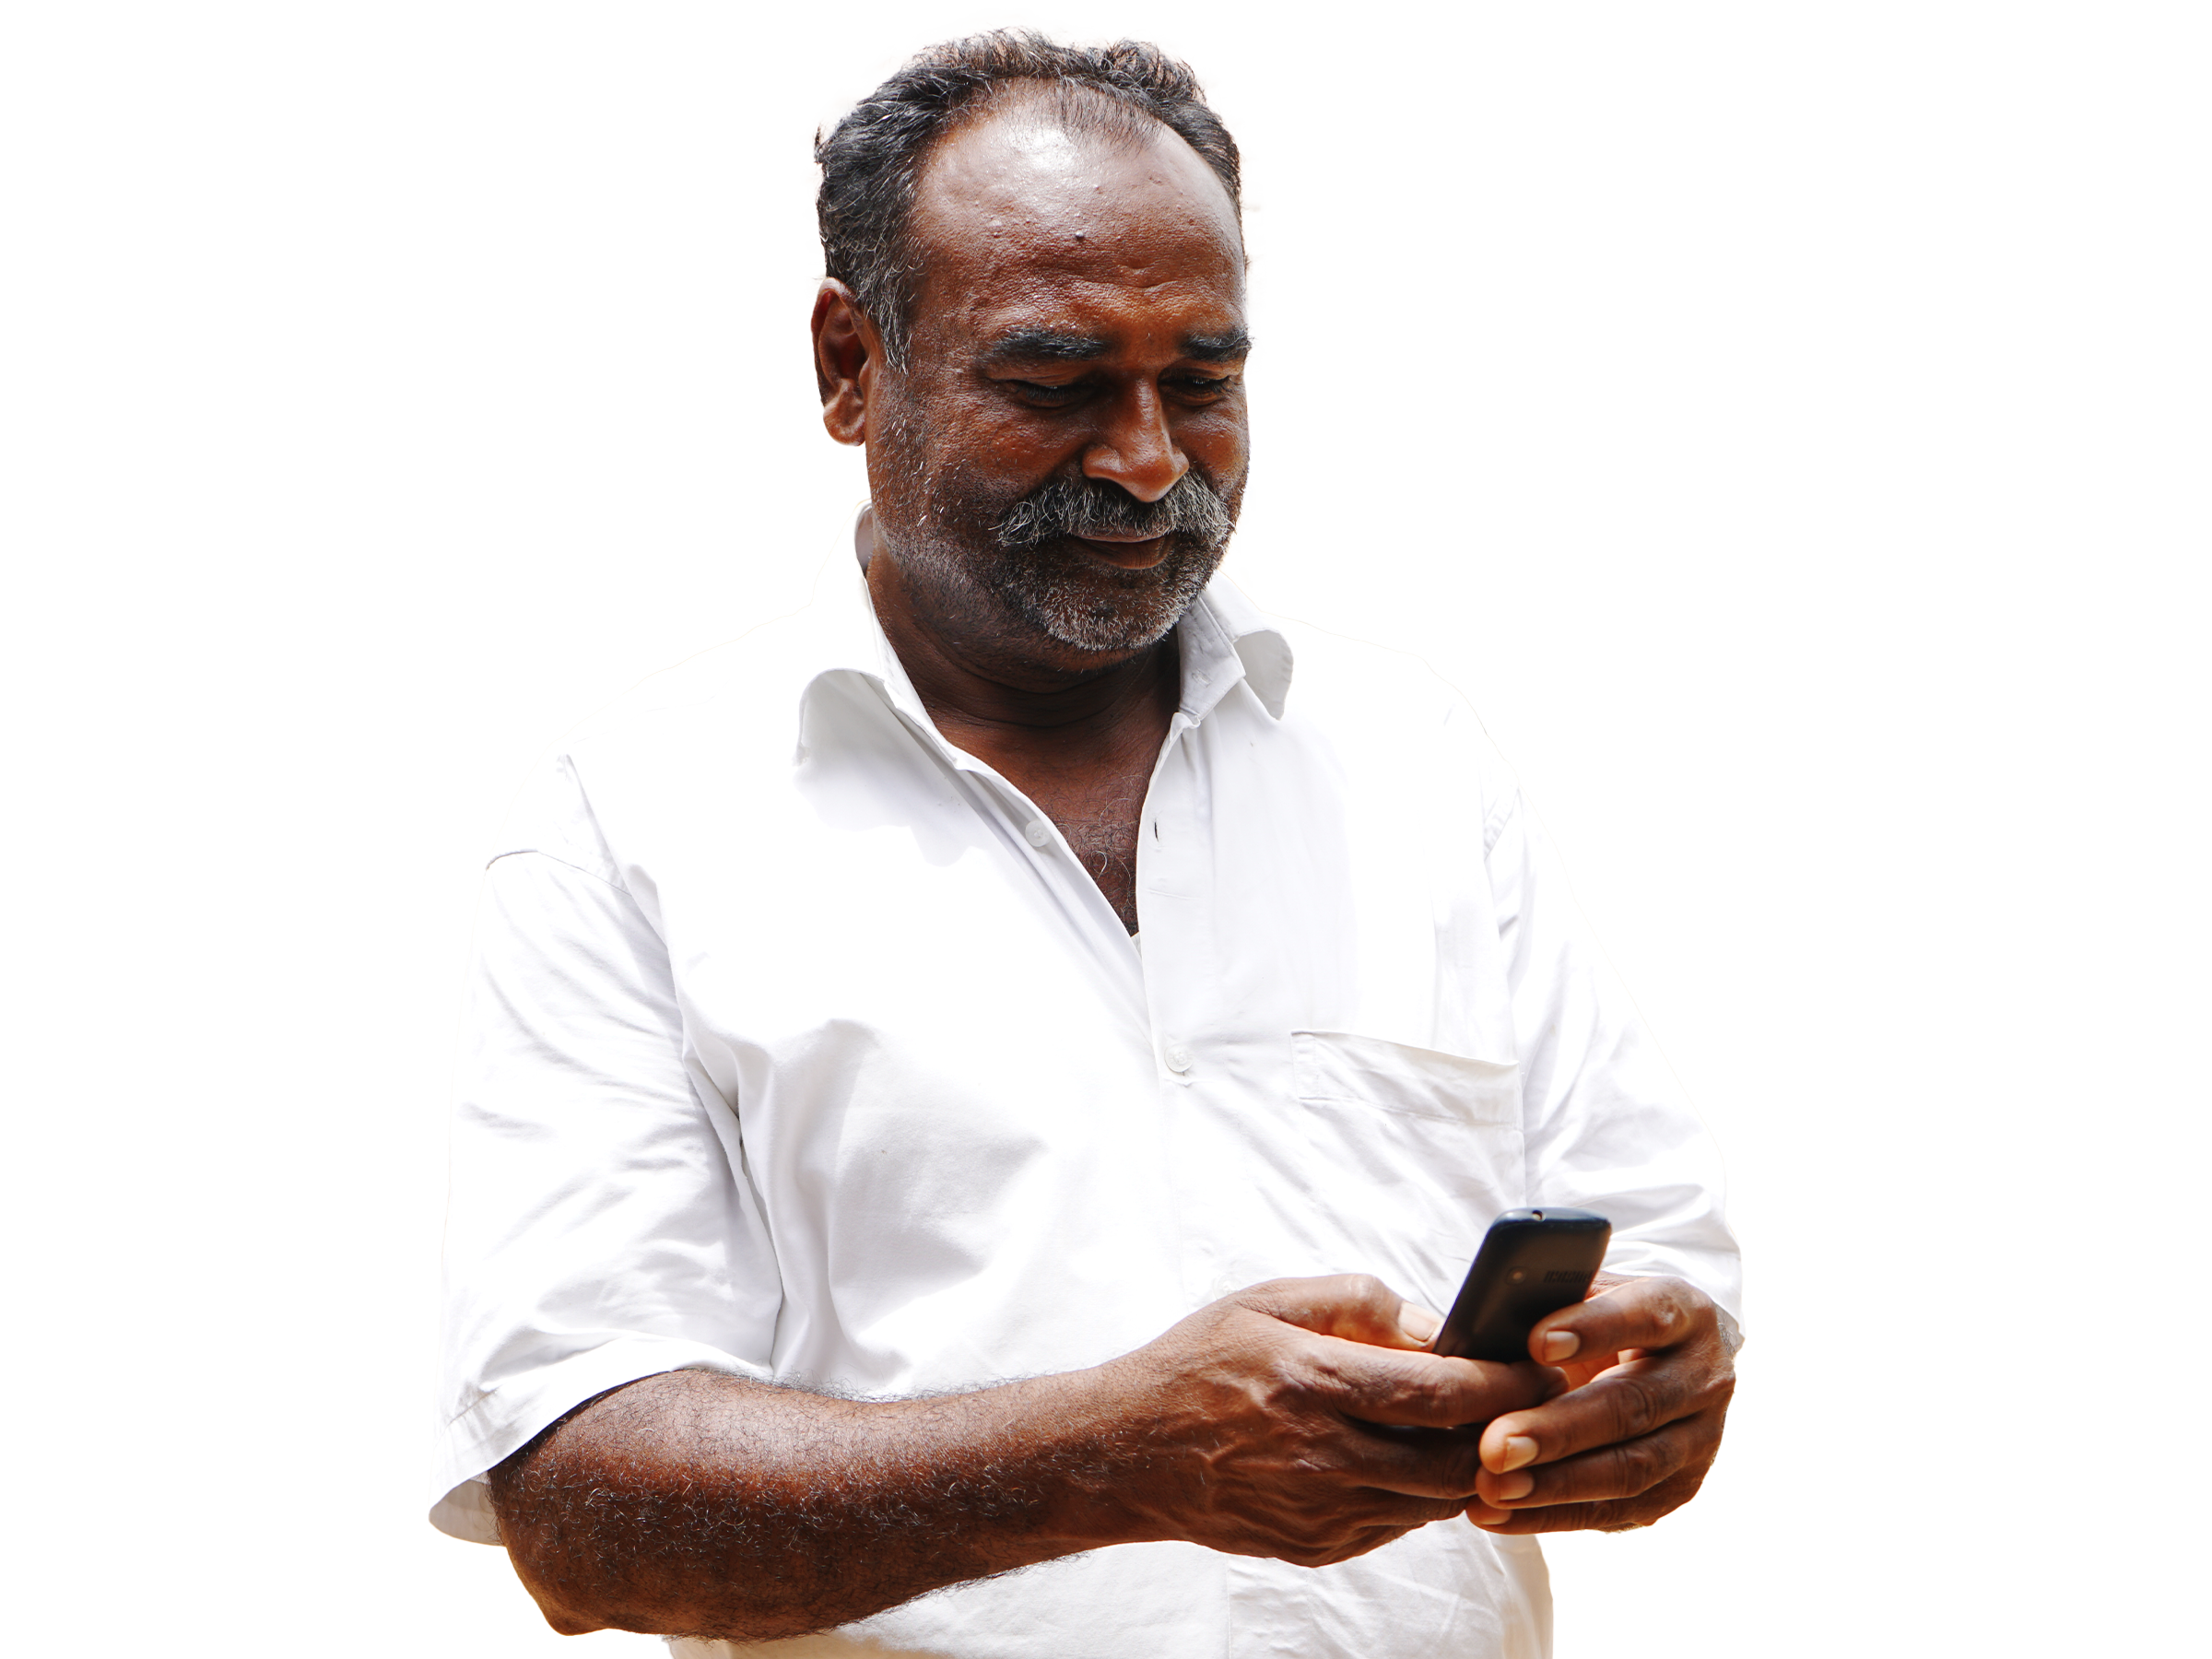 Man in market holding a mobile phone and smiling